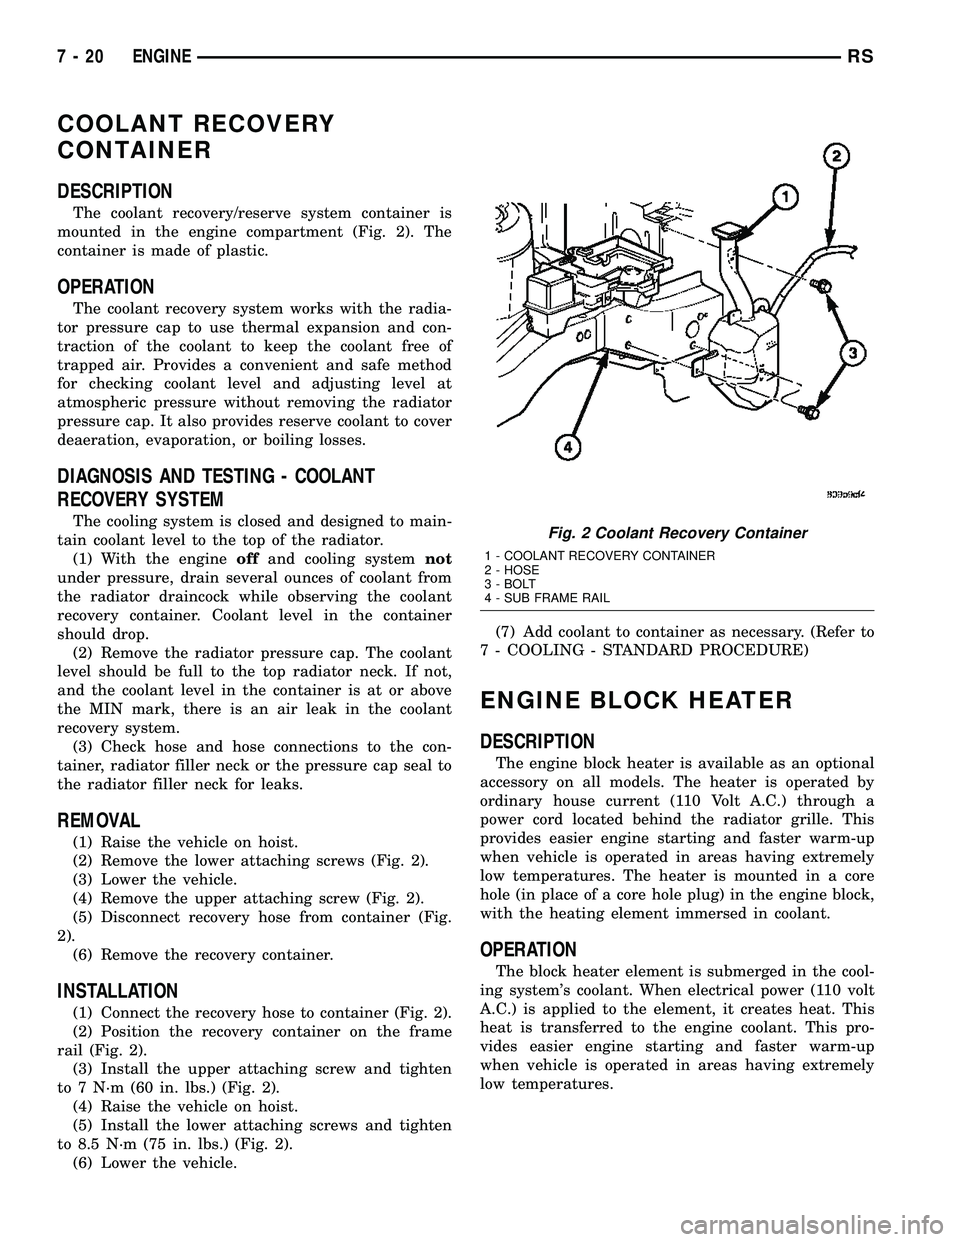 CHRYSLER VOYAGER 2005 User Guide COOLANT RECOVERY
CONTAINER
DESCRIPTION
The coolant recovery/reserve system container is
mounted in the engine compartment (Fig. 2). The
container is made of plastic.
OPERATION
The coolant recovery sys